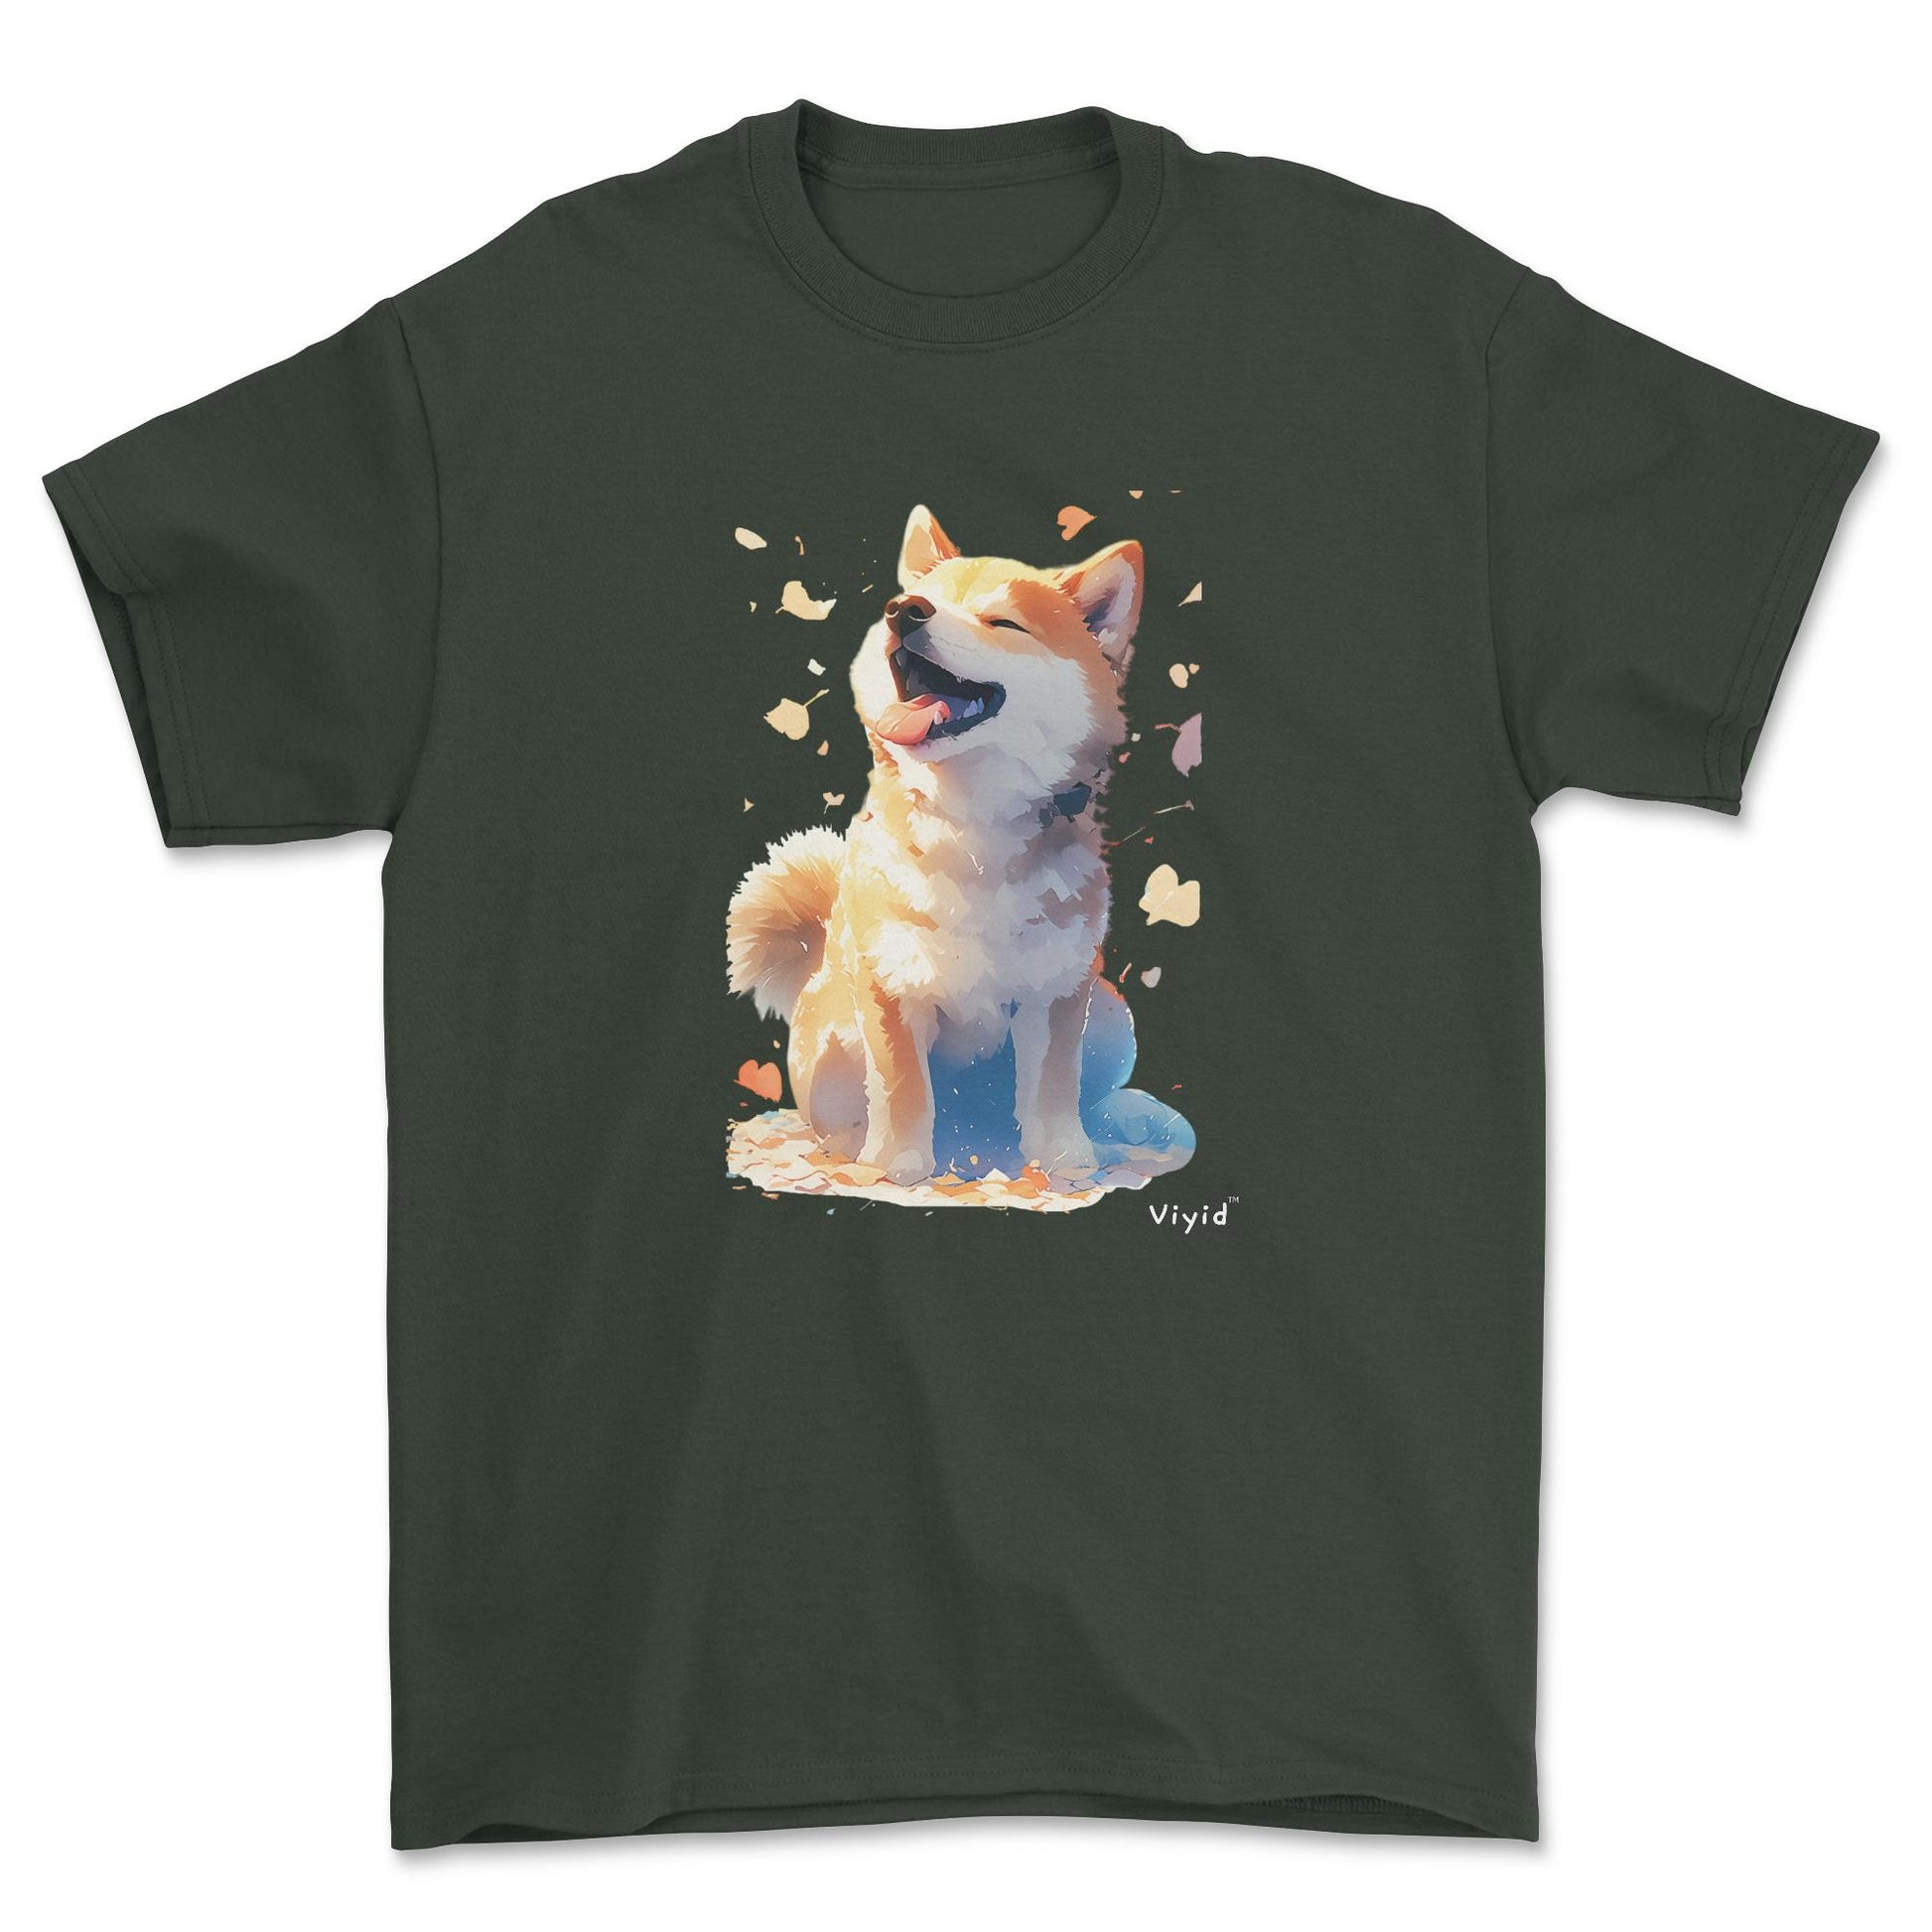 Japanese Shiba Inu youth t-shirt forest green